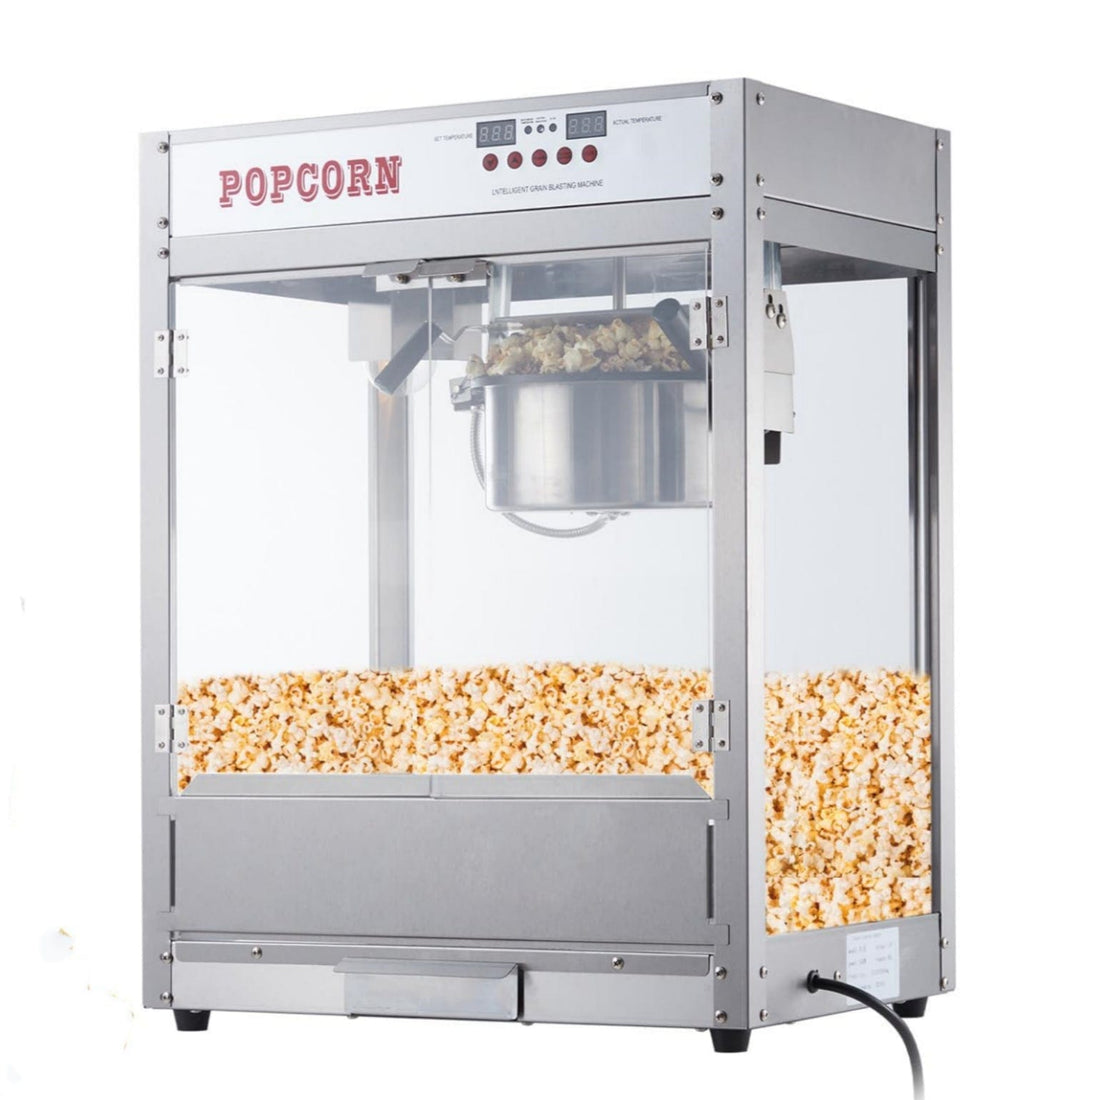 8 Oz Tabletop Popcorn Machine with Digital Control - Easy Clean & Keep Warm Feature